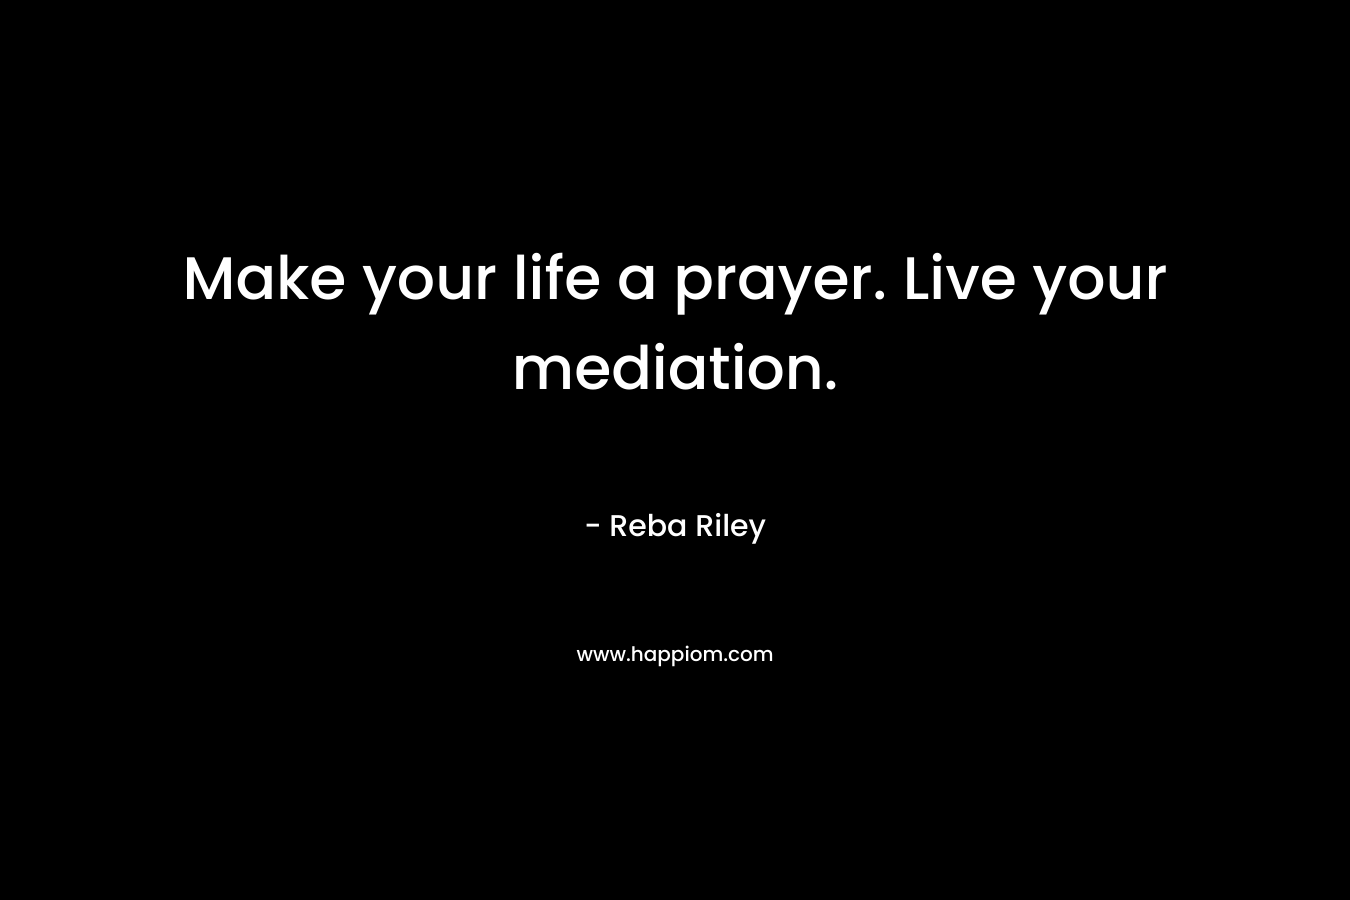 Make your life a prayer. Live your mediation.